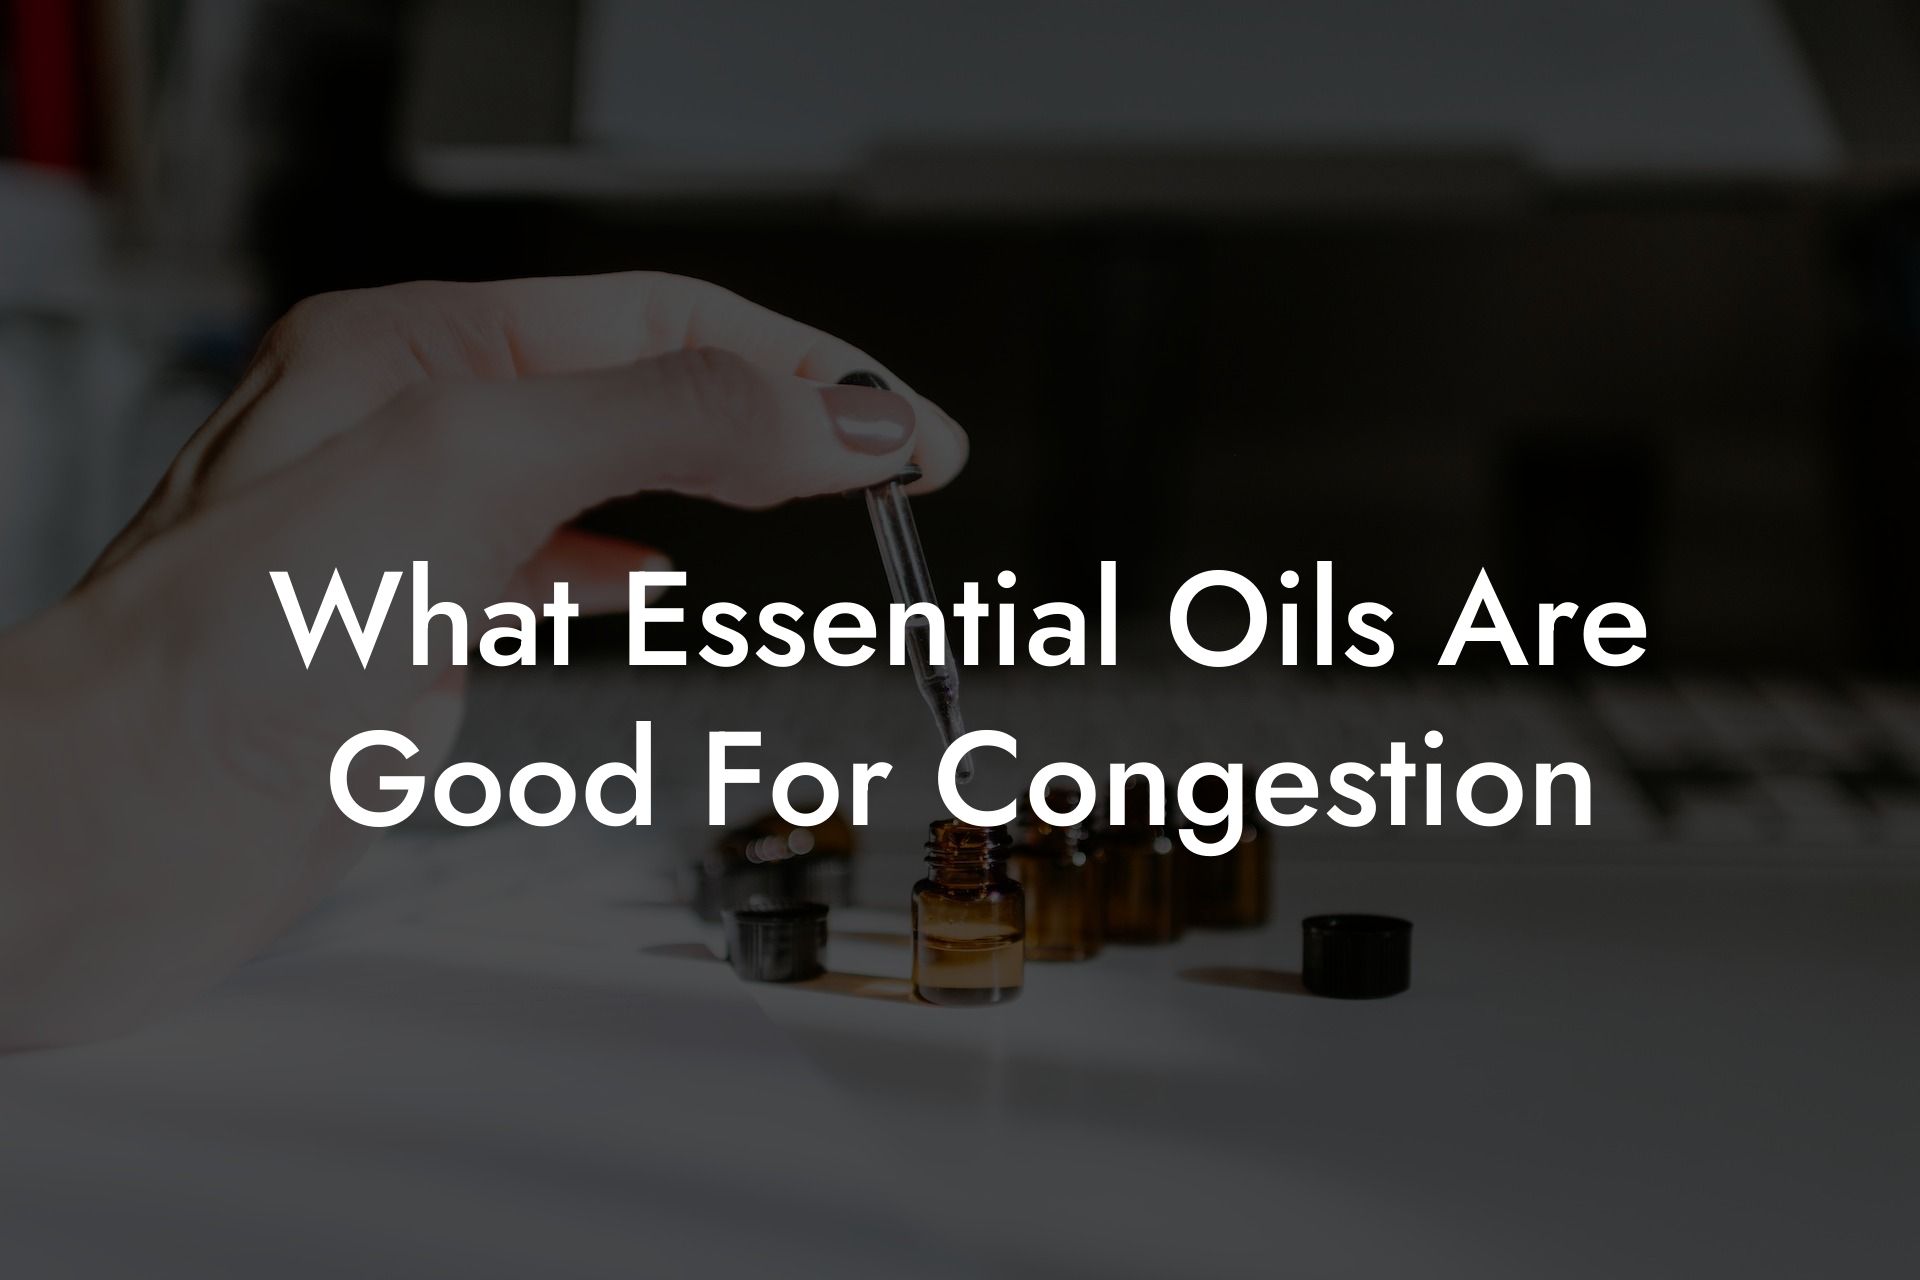 What Essential Oils Are Good For Congestion